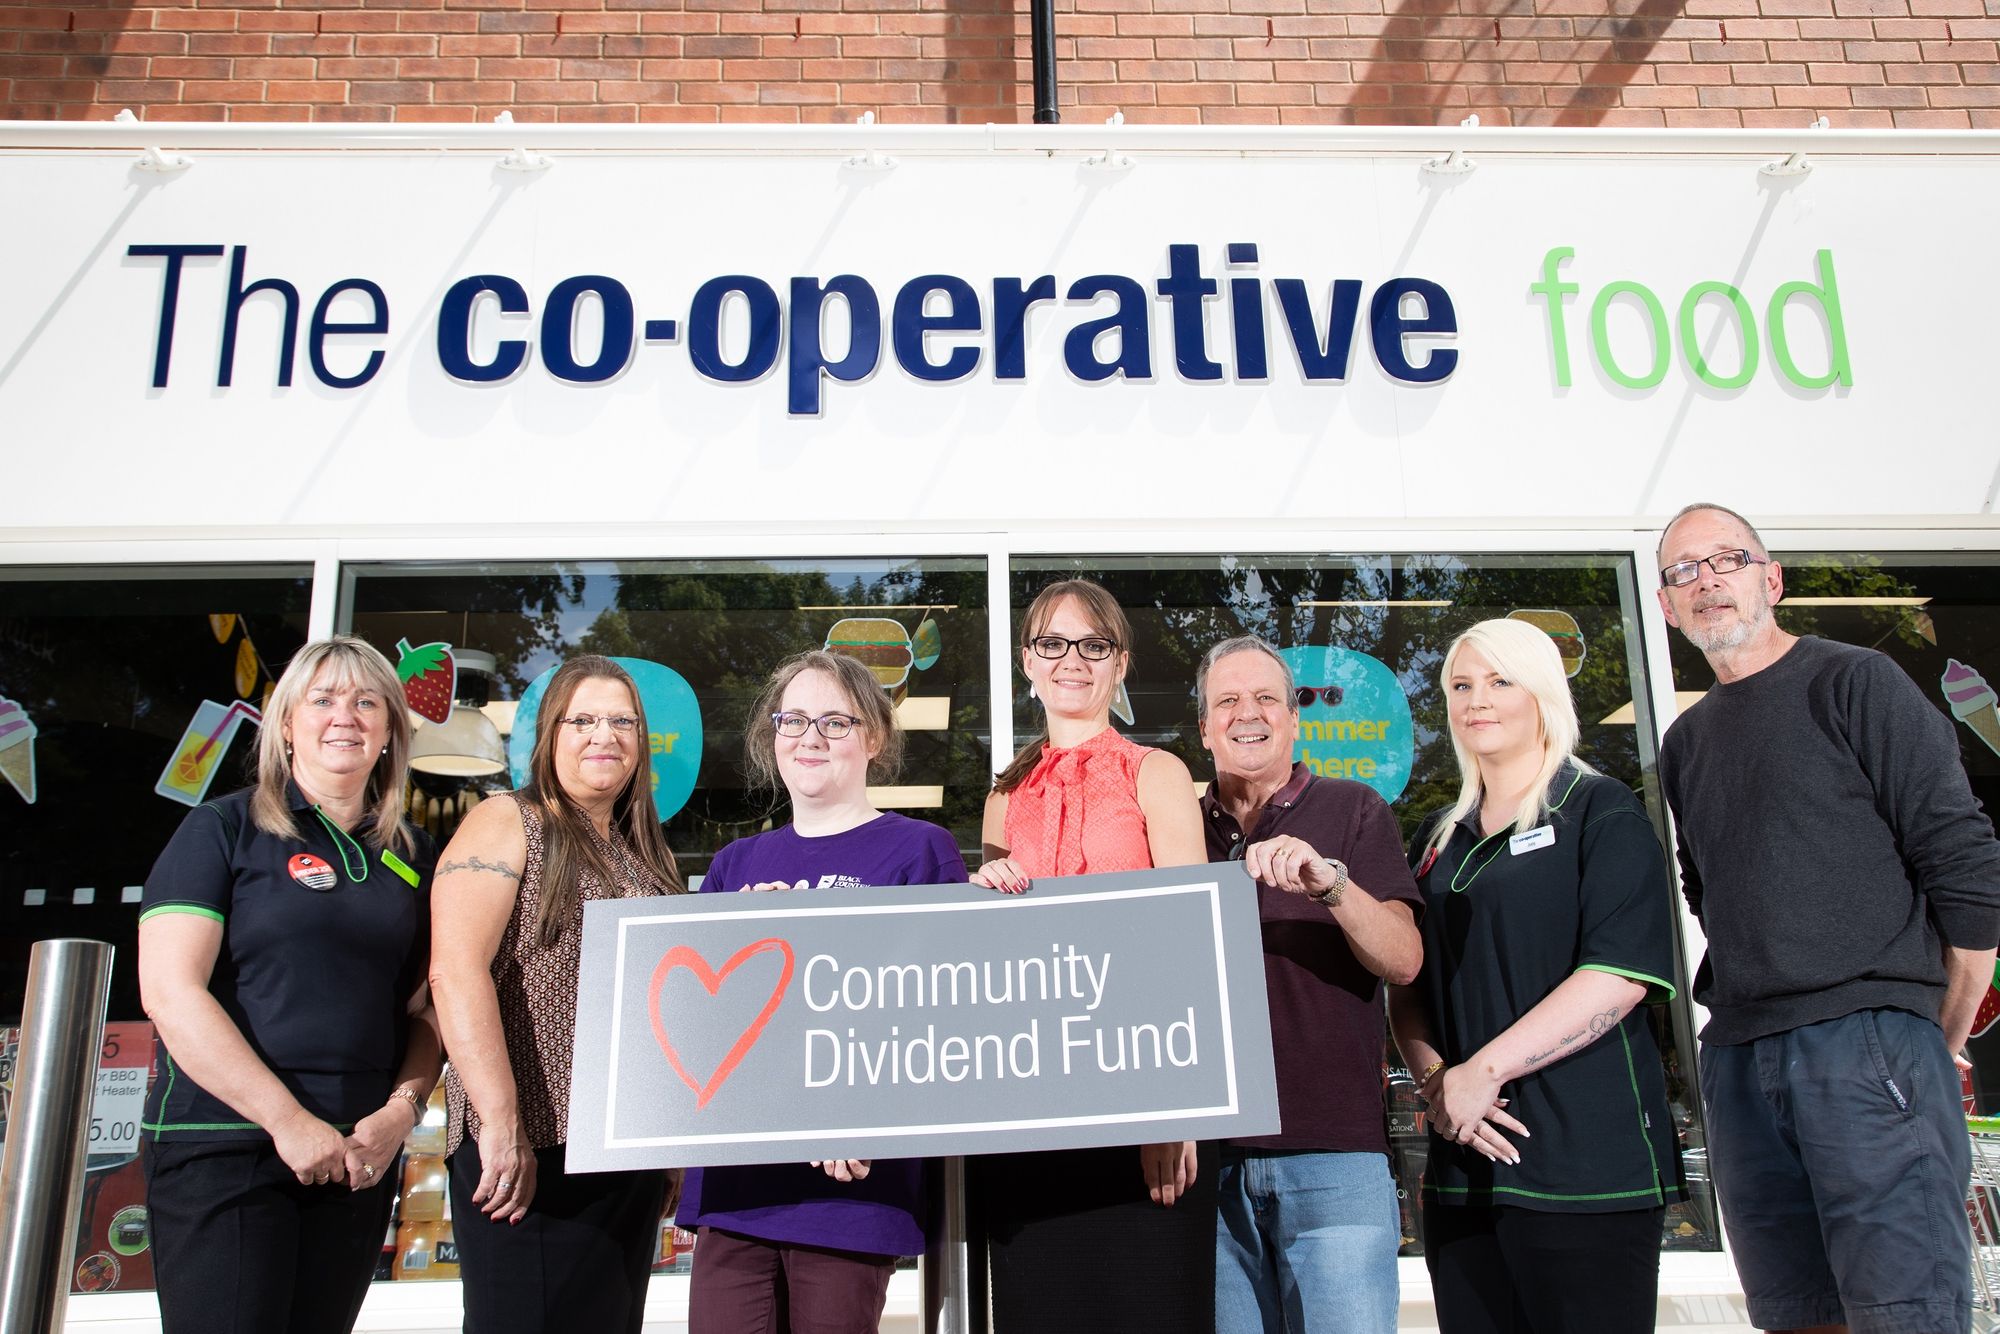 Thirty-six community groups and charities handed share of £44,000 funding boost from our Community Dividend Fund